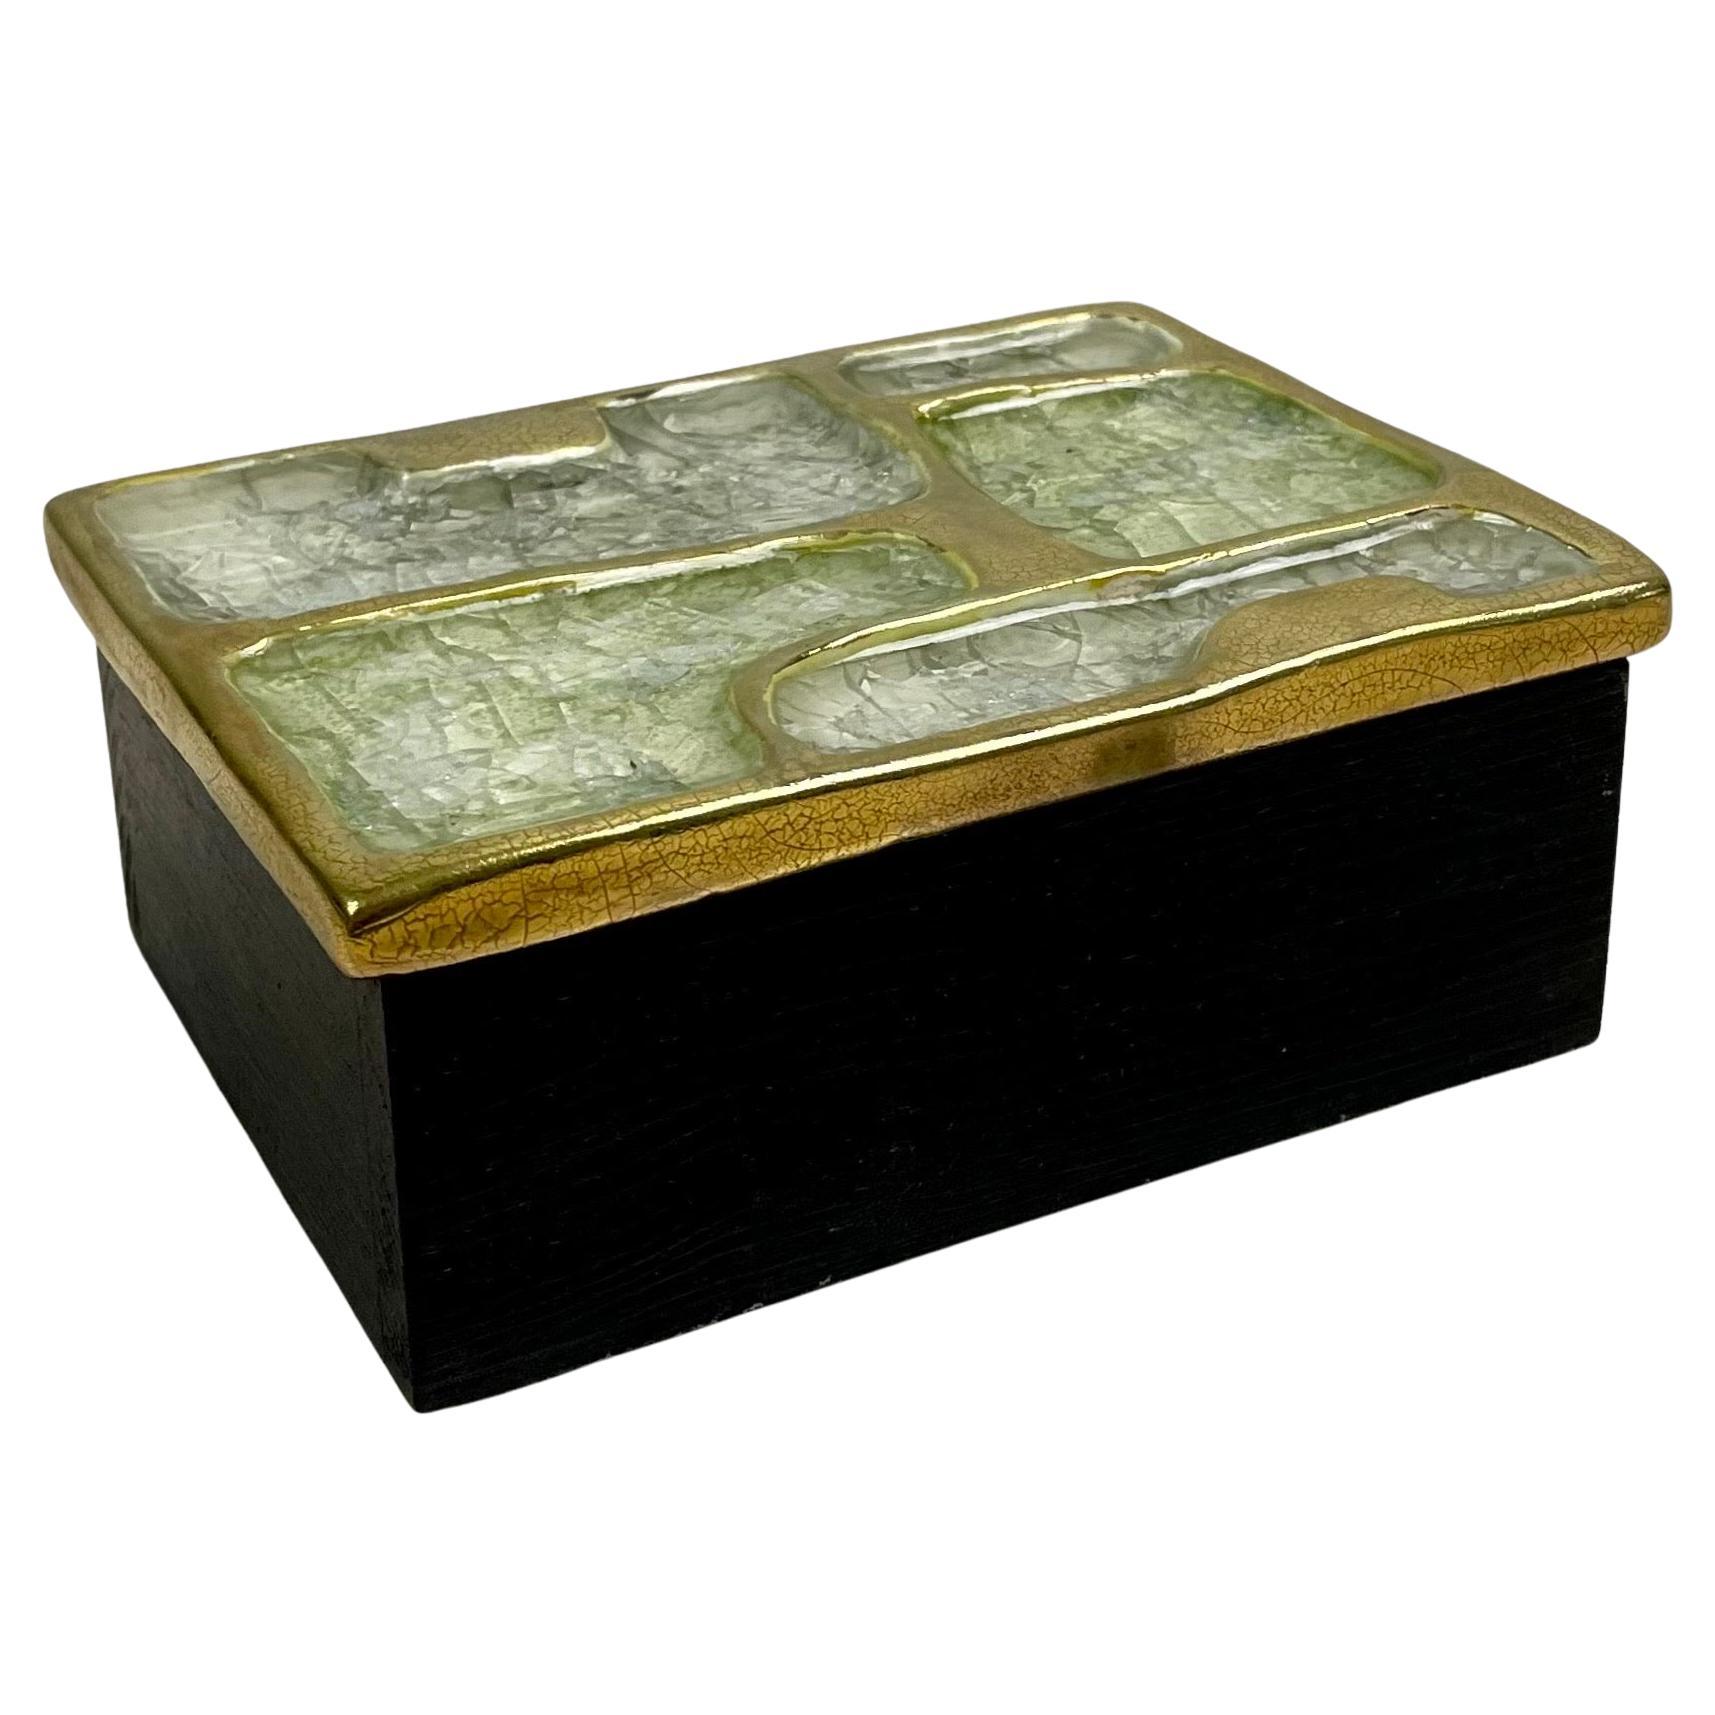 Secret box, jewelry box, storage box, tidy rectangular with glazed ceramic lid in shades of gold, white and pellucid and wooden base, by Mithé Espelt.
The box is decorated with geometric shapes. This box gives a very decorative and visual result.